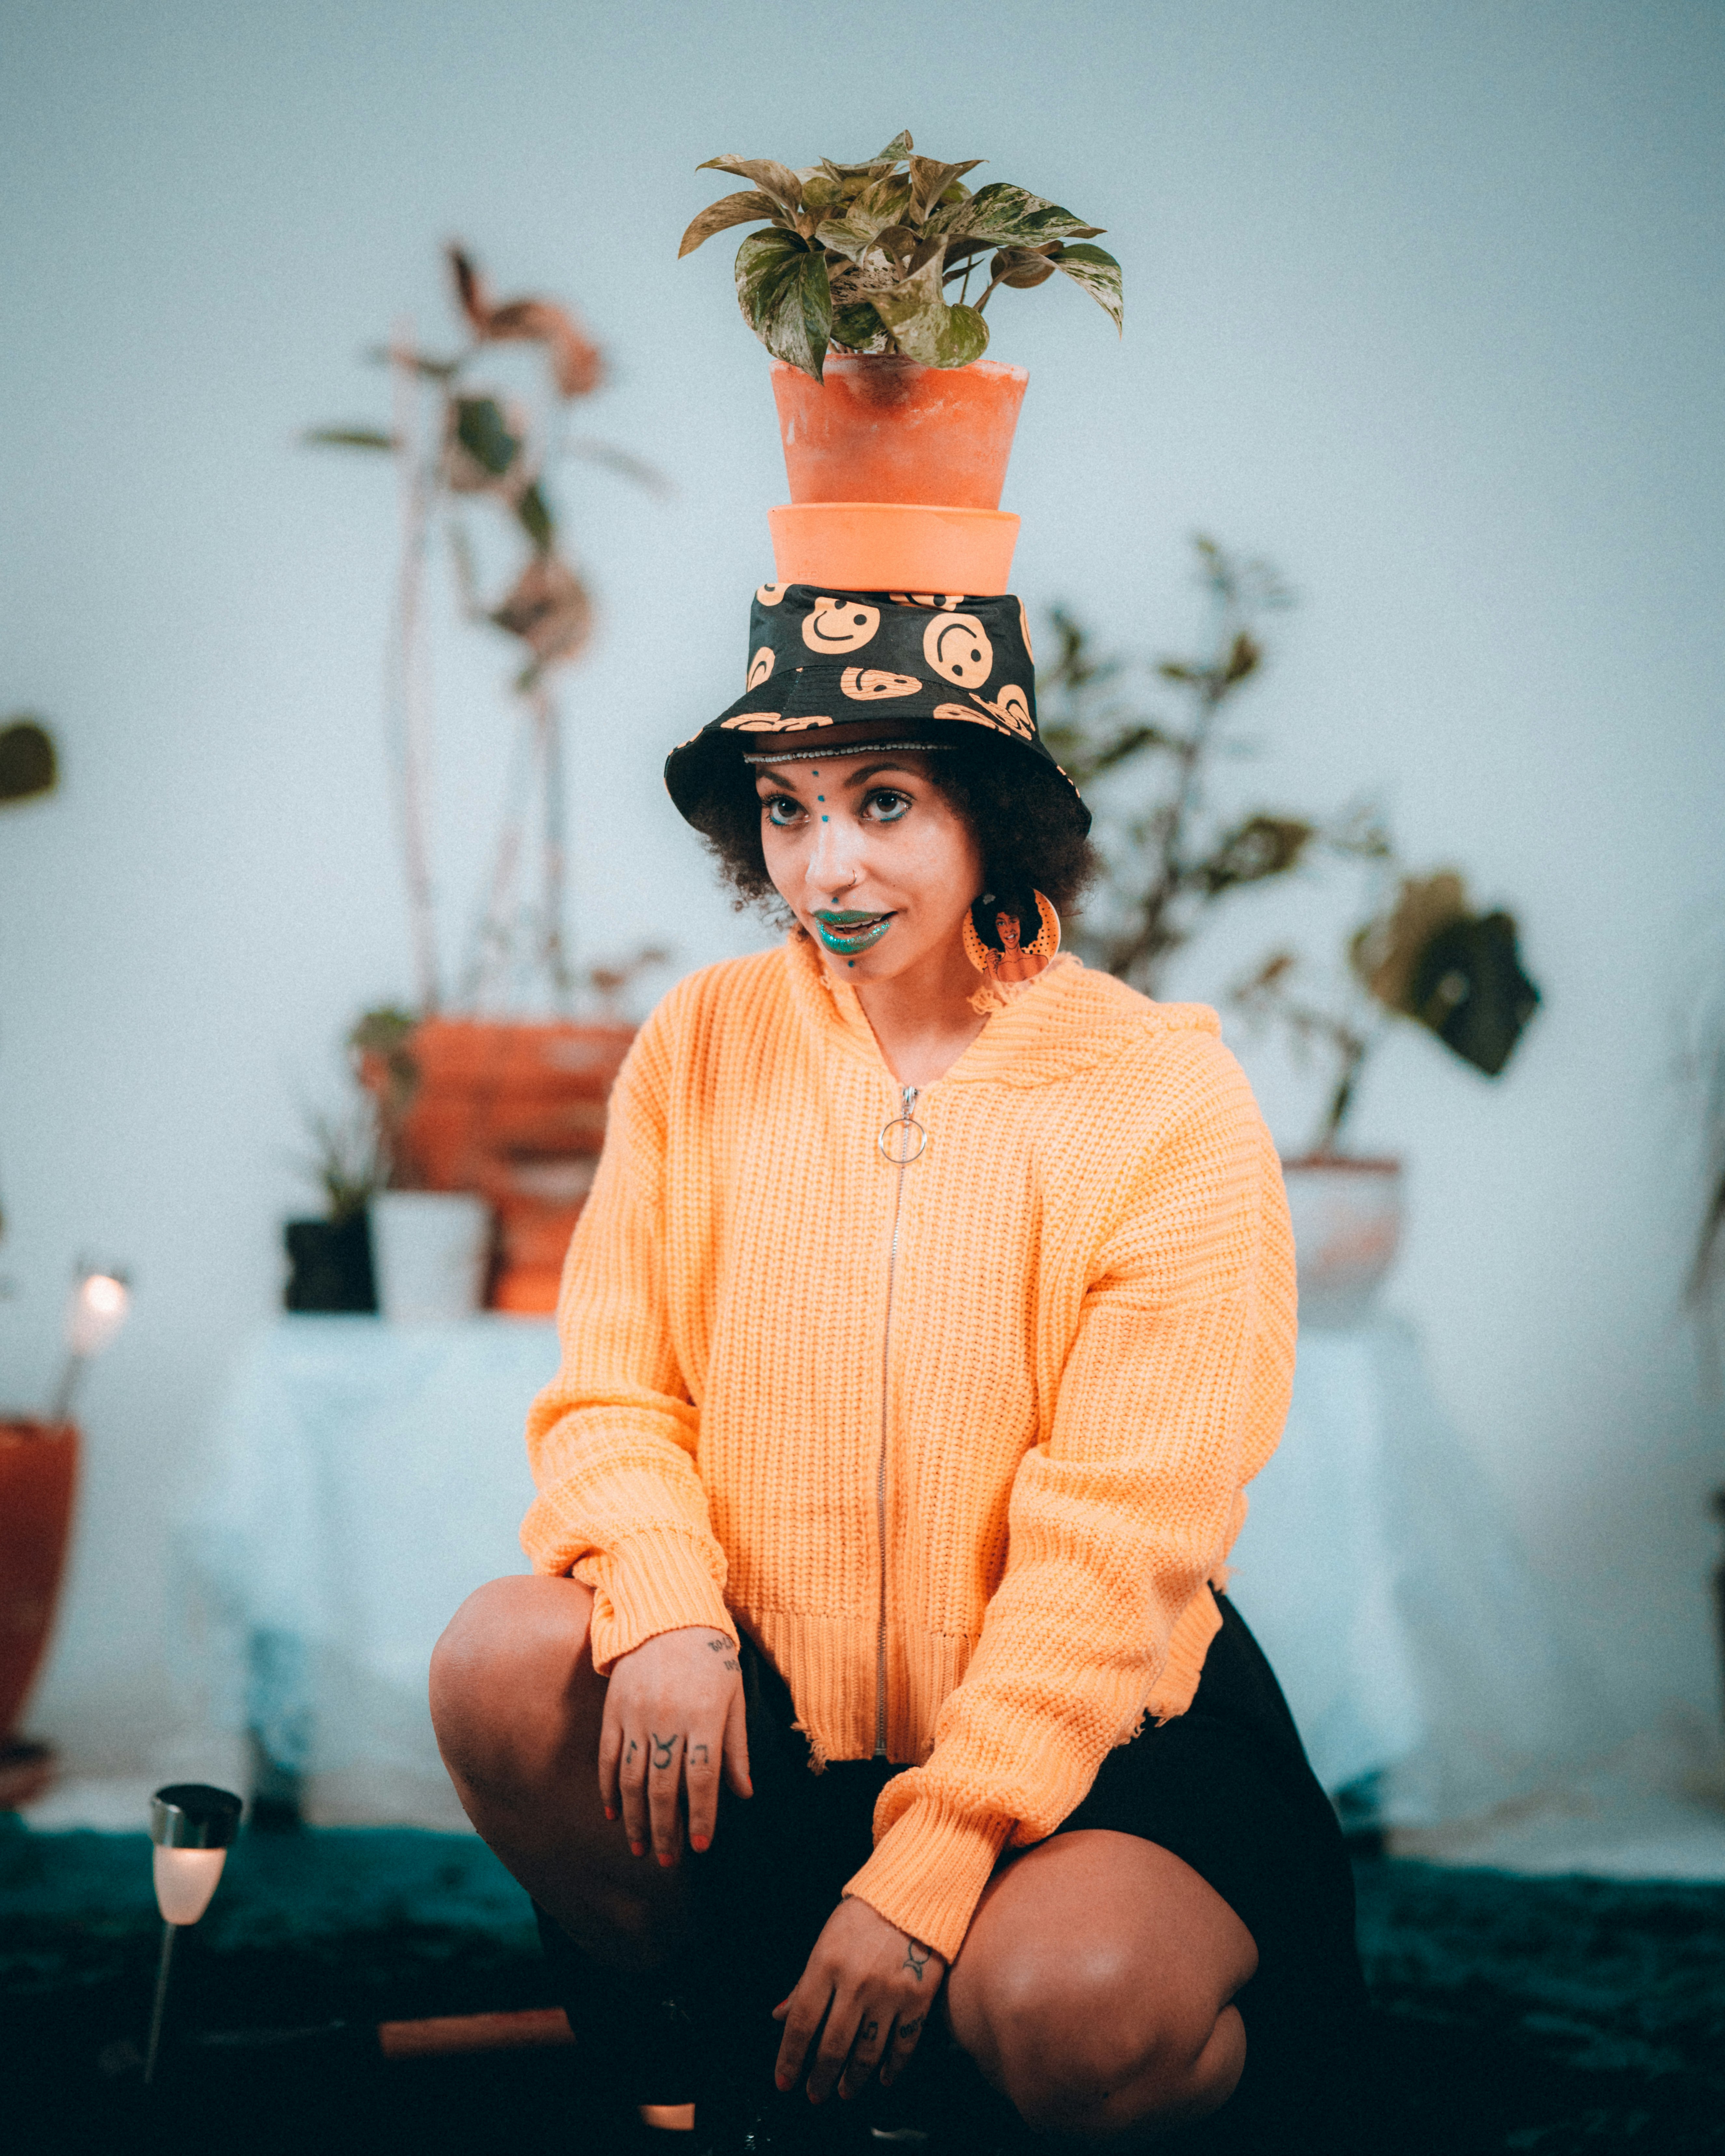 woman in yellow sweater and black pants wearing black hat sitting on brown wooden seat